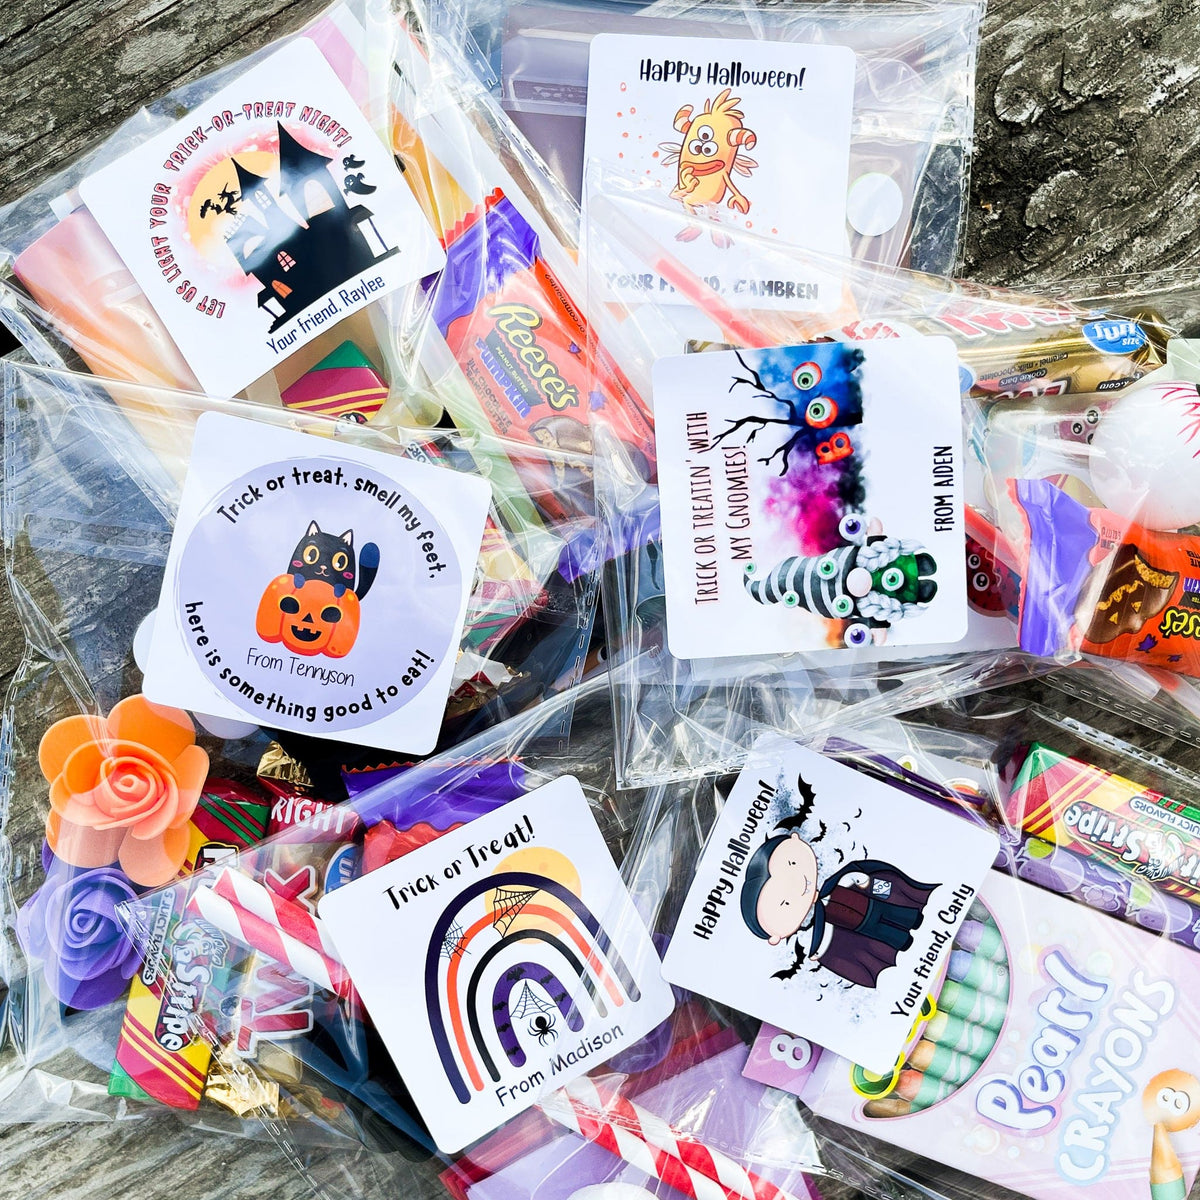 Personalised Halloween trick or treat bag, Stickerscape